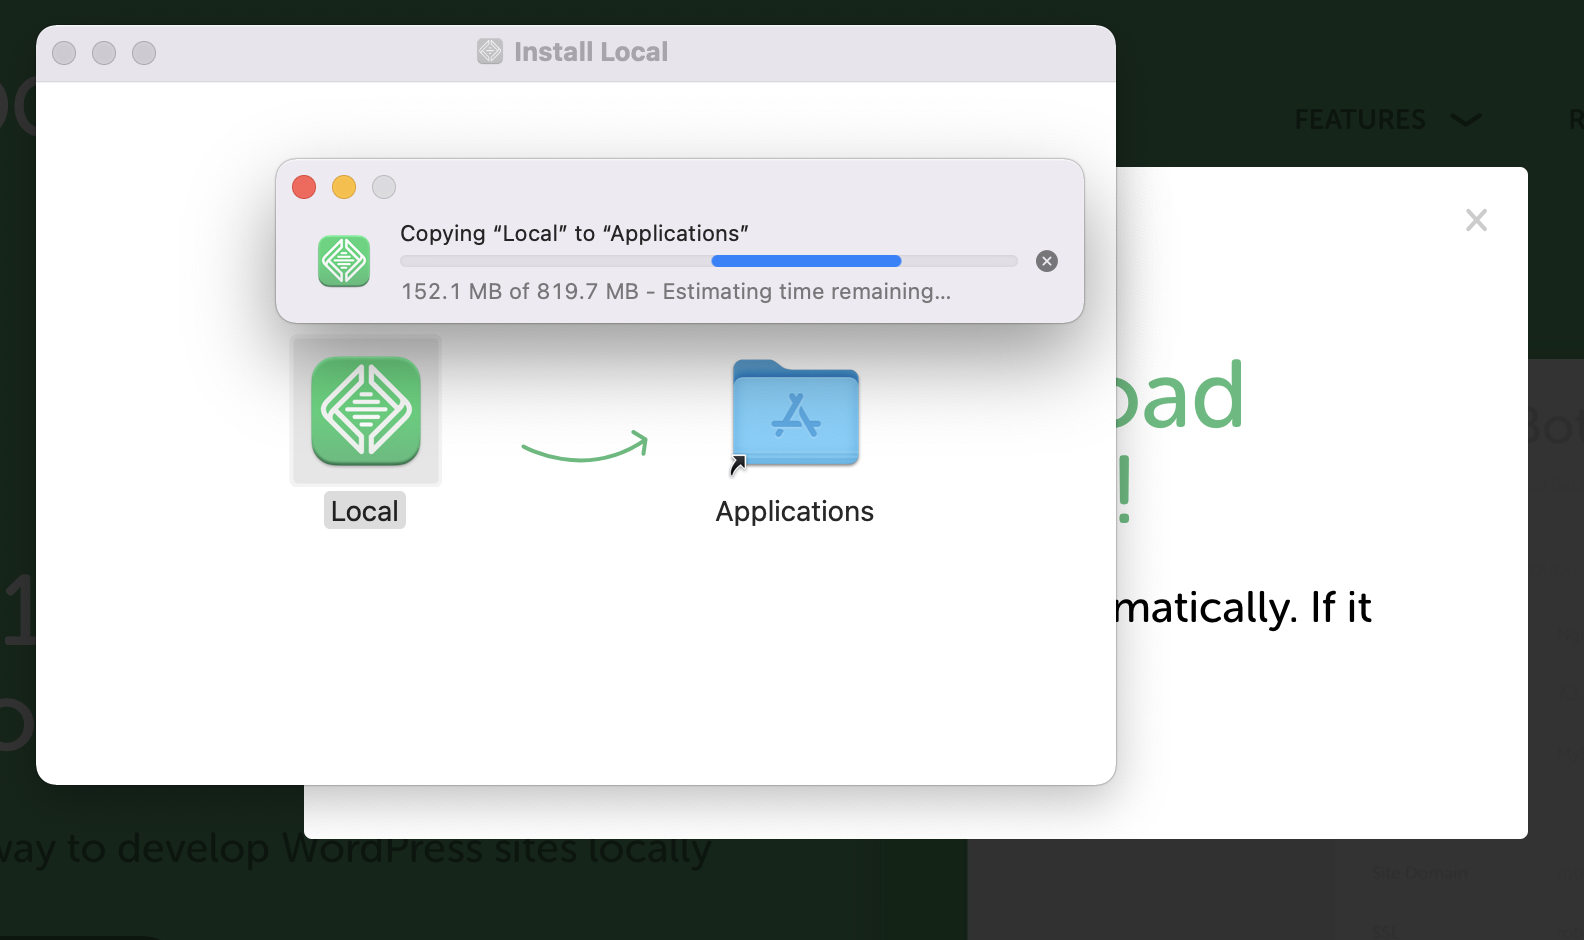 Installing Local on your computer